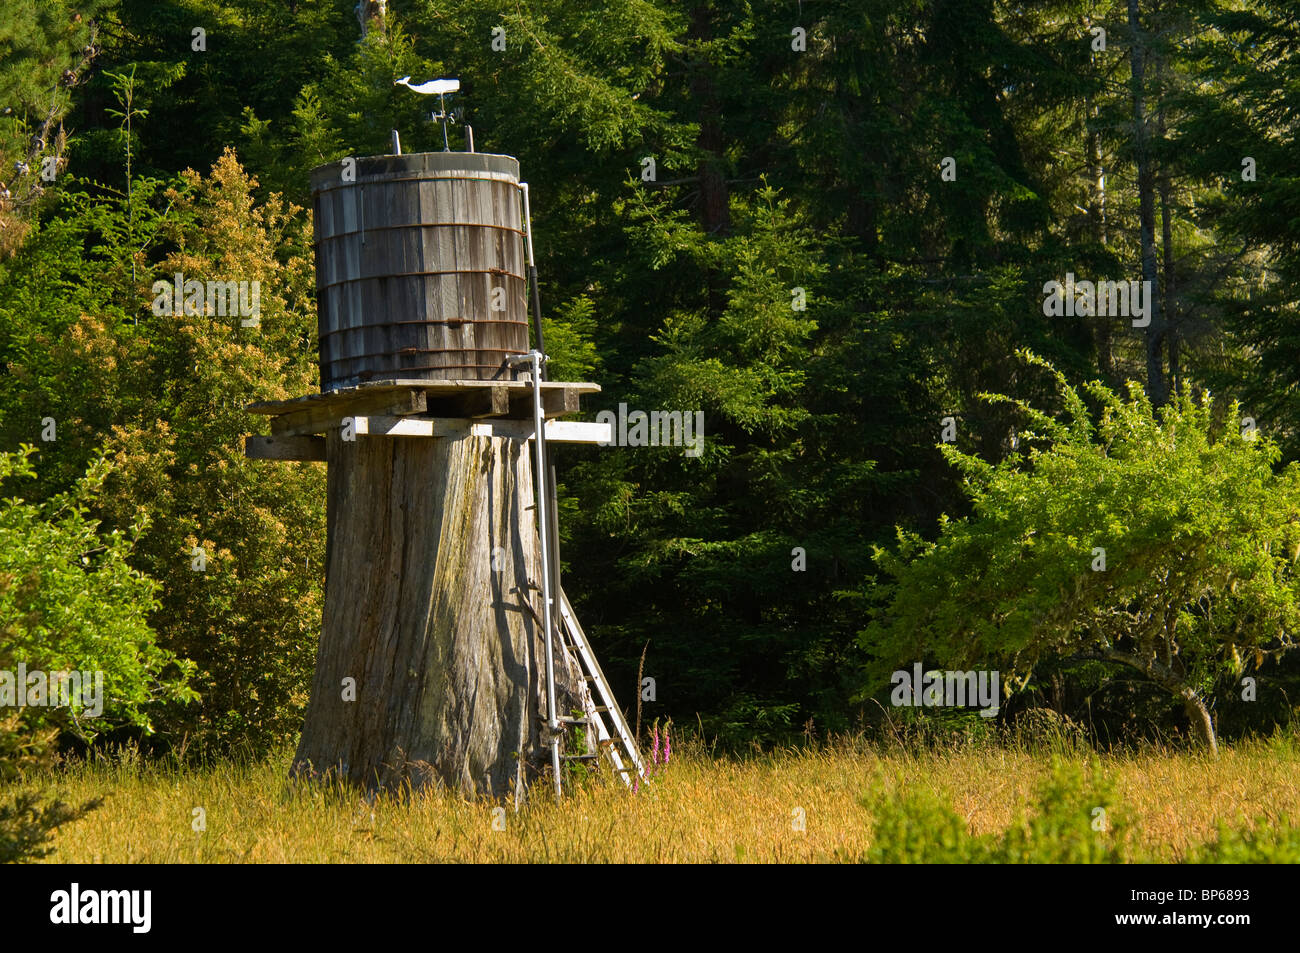 Wooden water storage tank on top of large tree stump, near Albion, Mendocino County, California Stock Photo